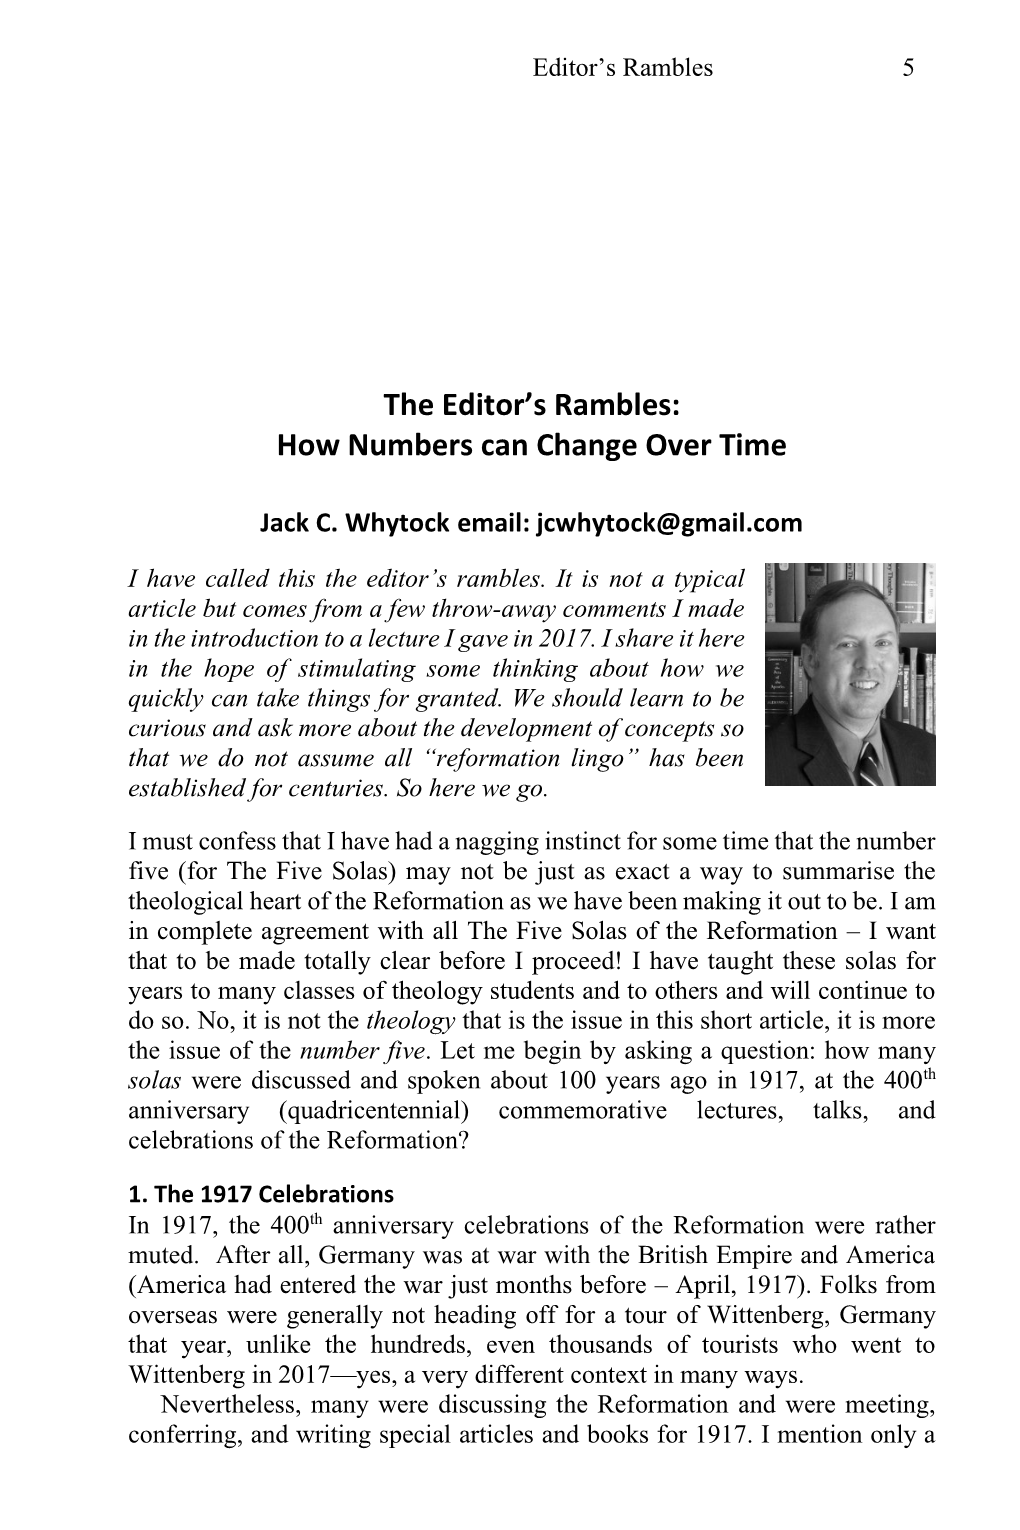 The Editor's Rambles: How Numbers Can Change Over Time